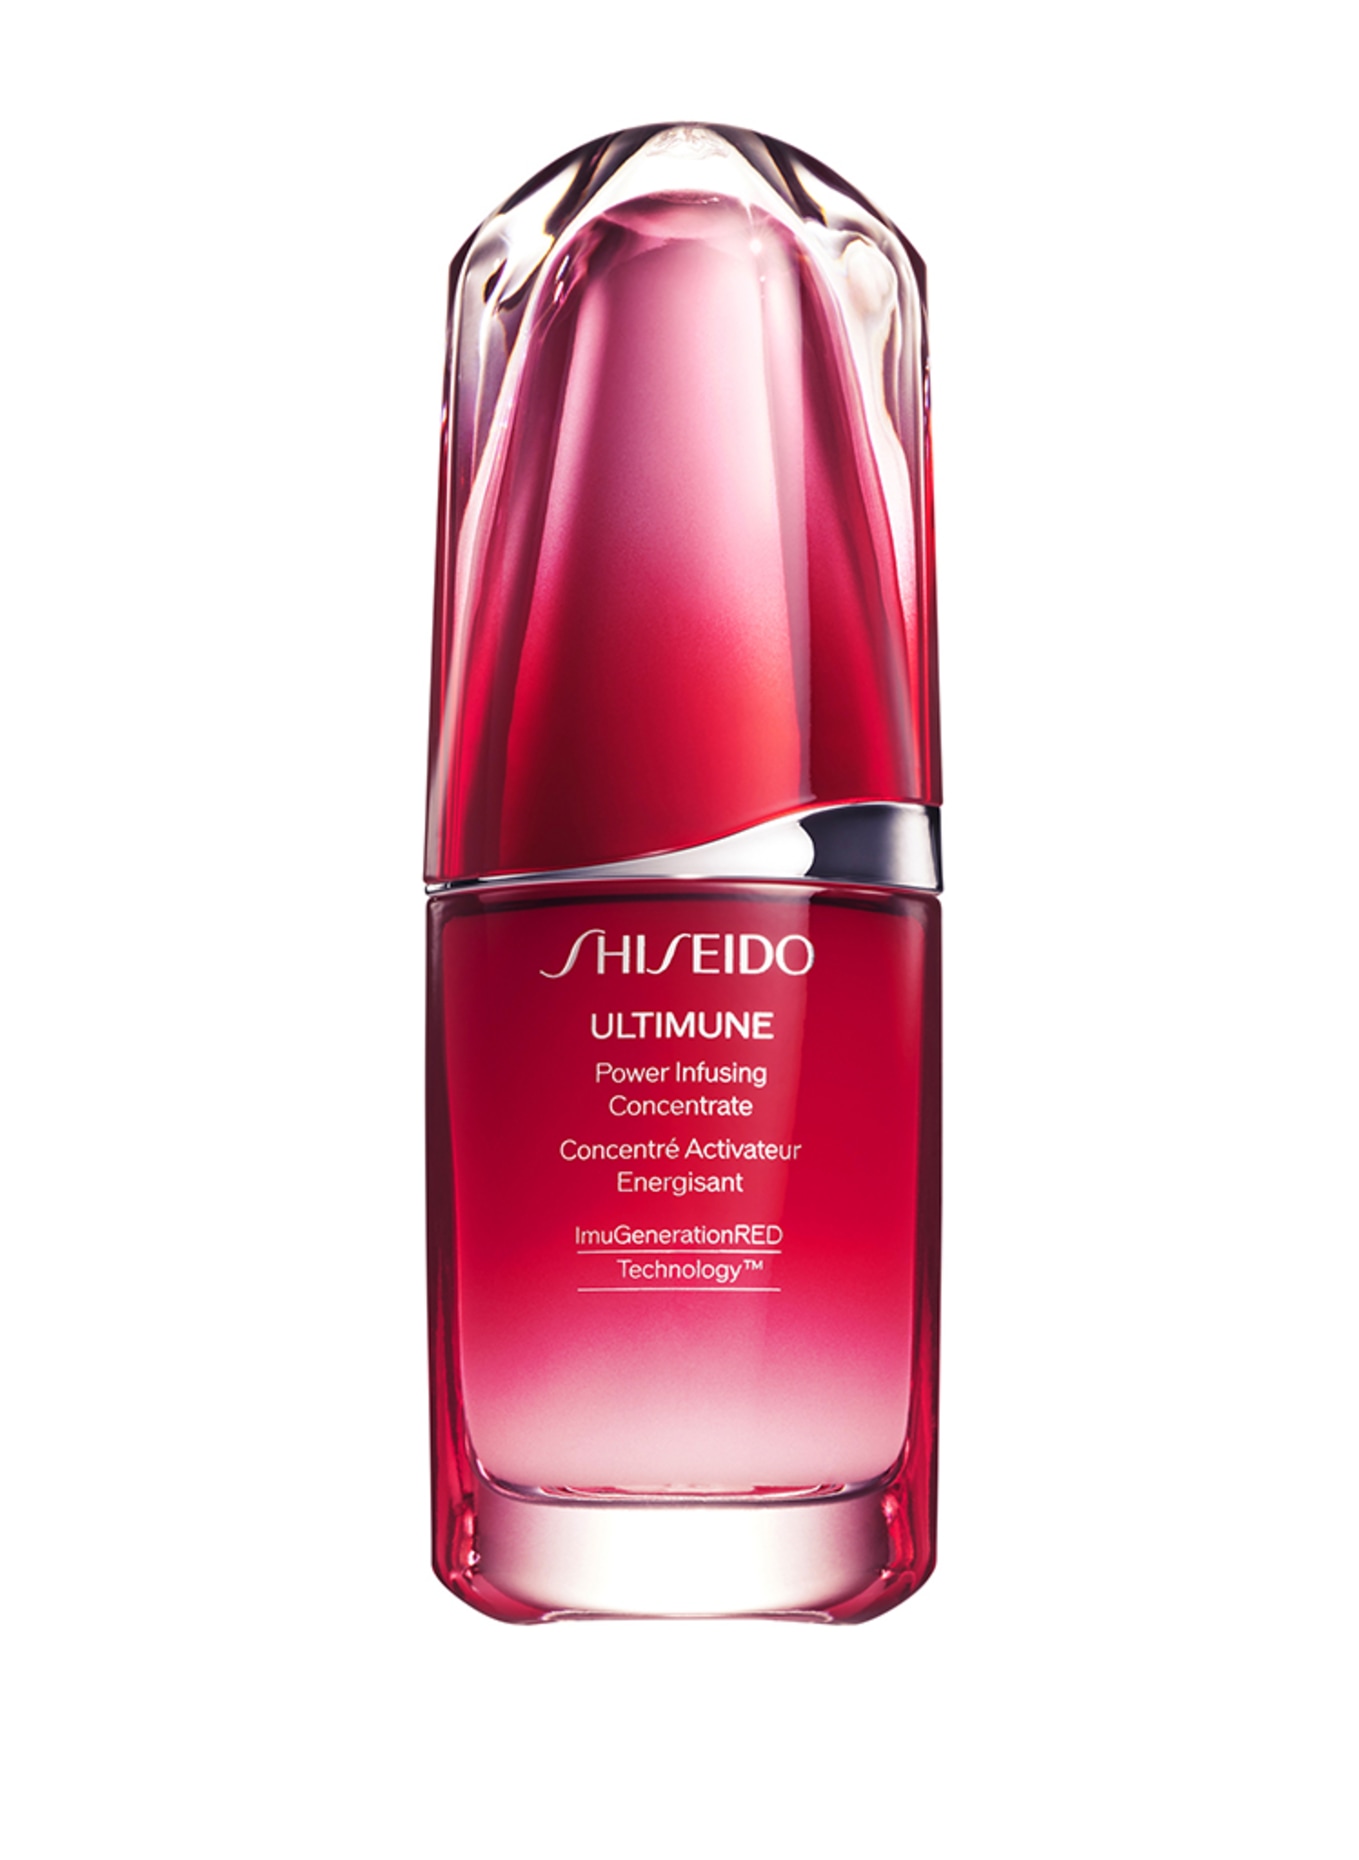 SHISEIDO ULTIMUNE POWER INFUSING CONCENTRATE (Bild 1)